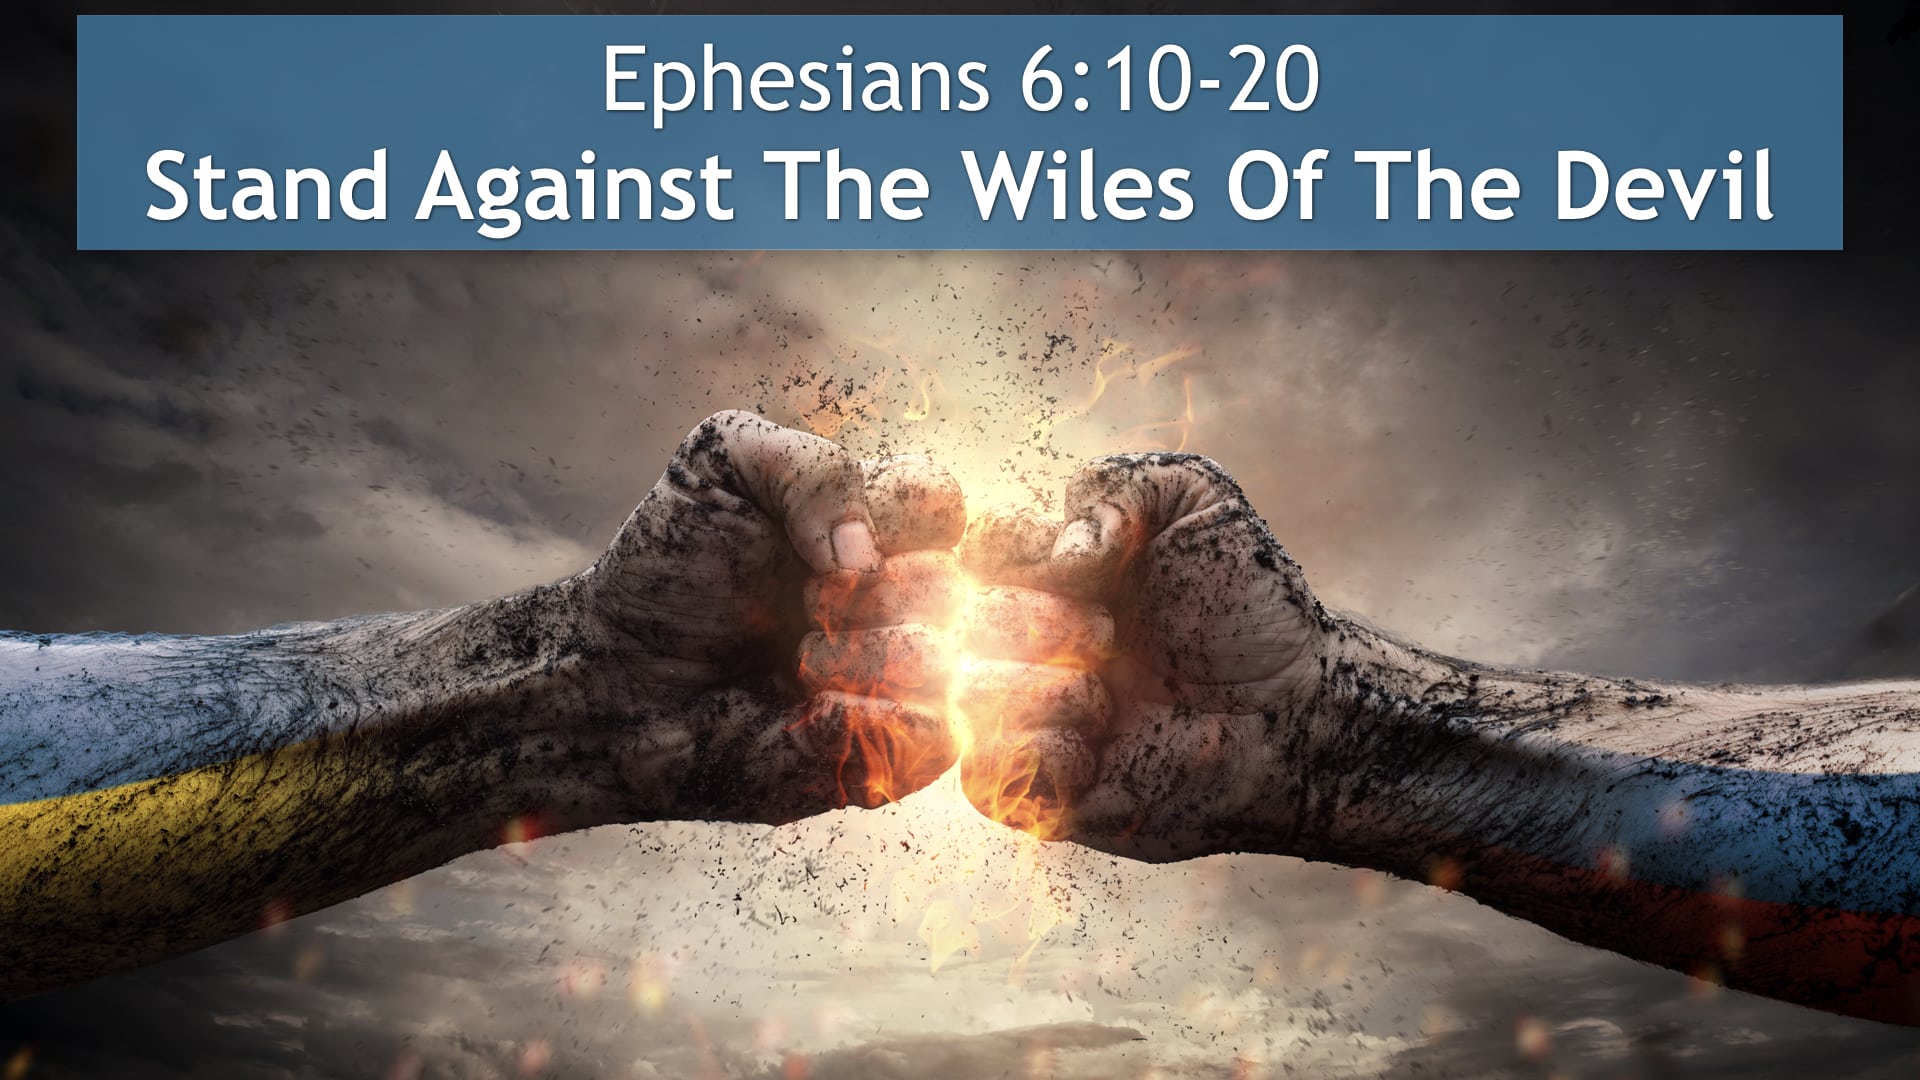 Jerry Simmons teaching Ephesians 6, Stand Against The Wiles Of The Devil